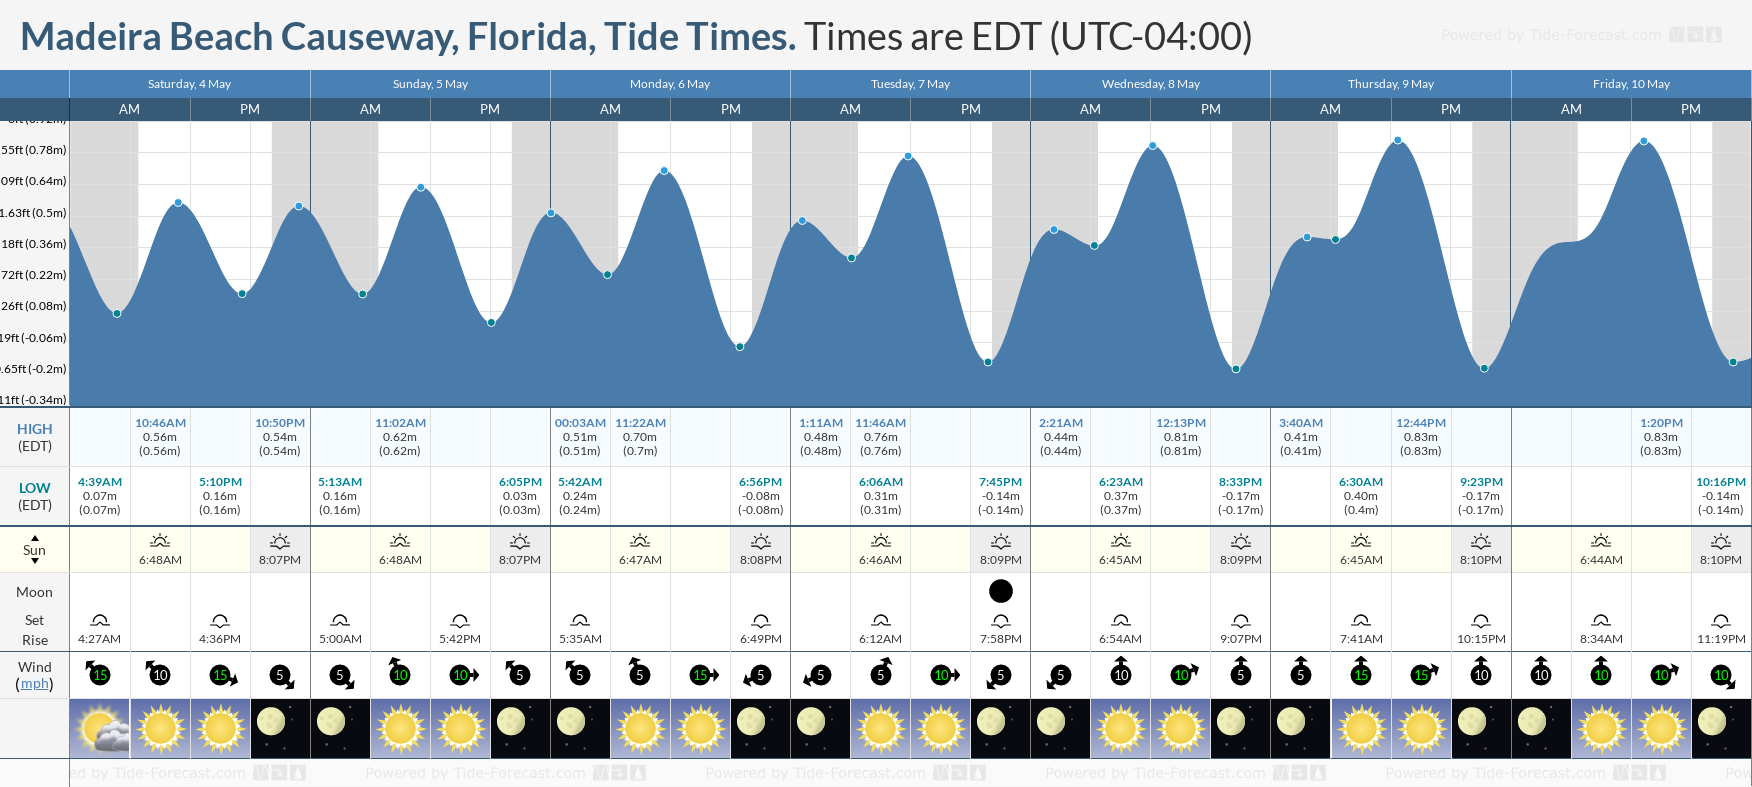 Madeira Beach Causeway, Florida Tide Chart including high and low tide tide times for the next 7 days